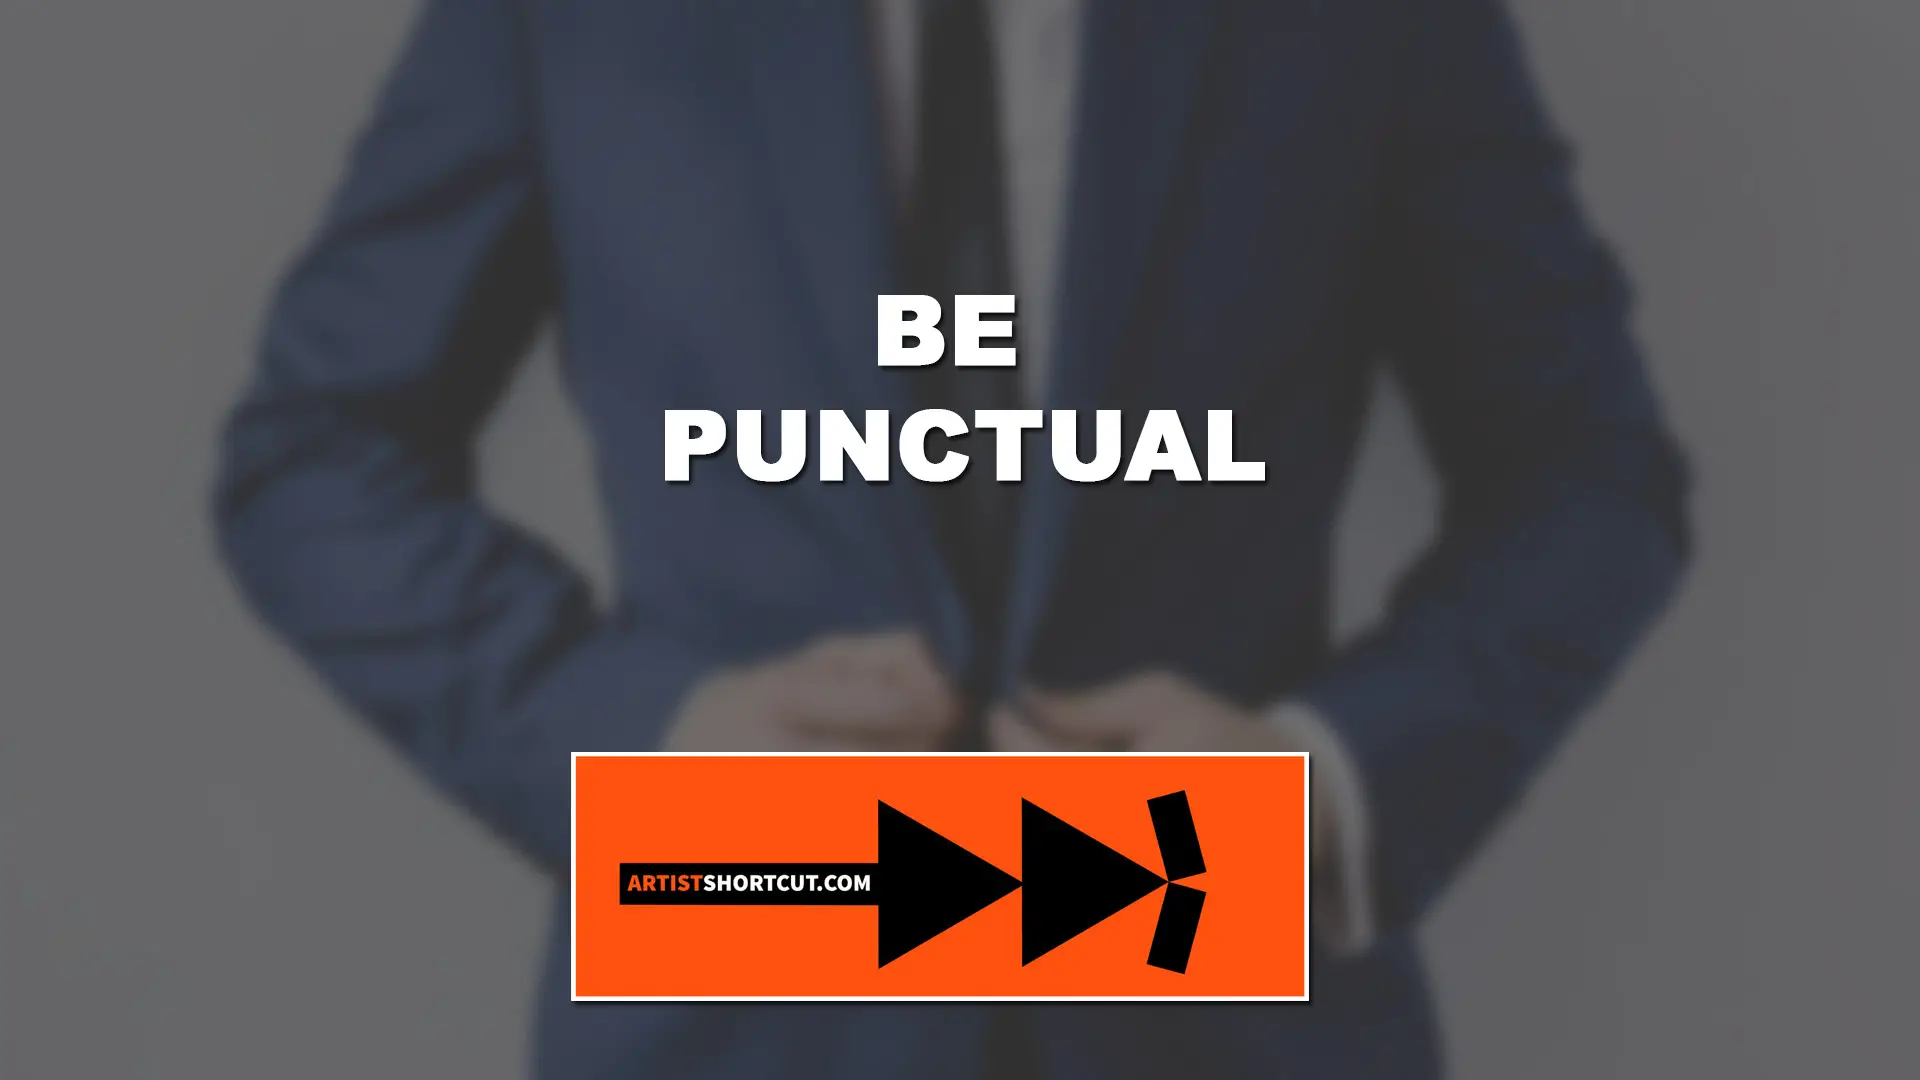 Be Punctual